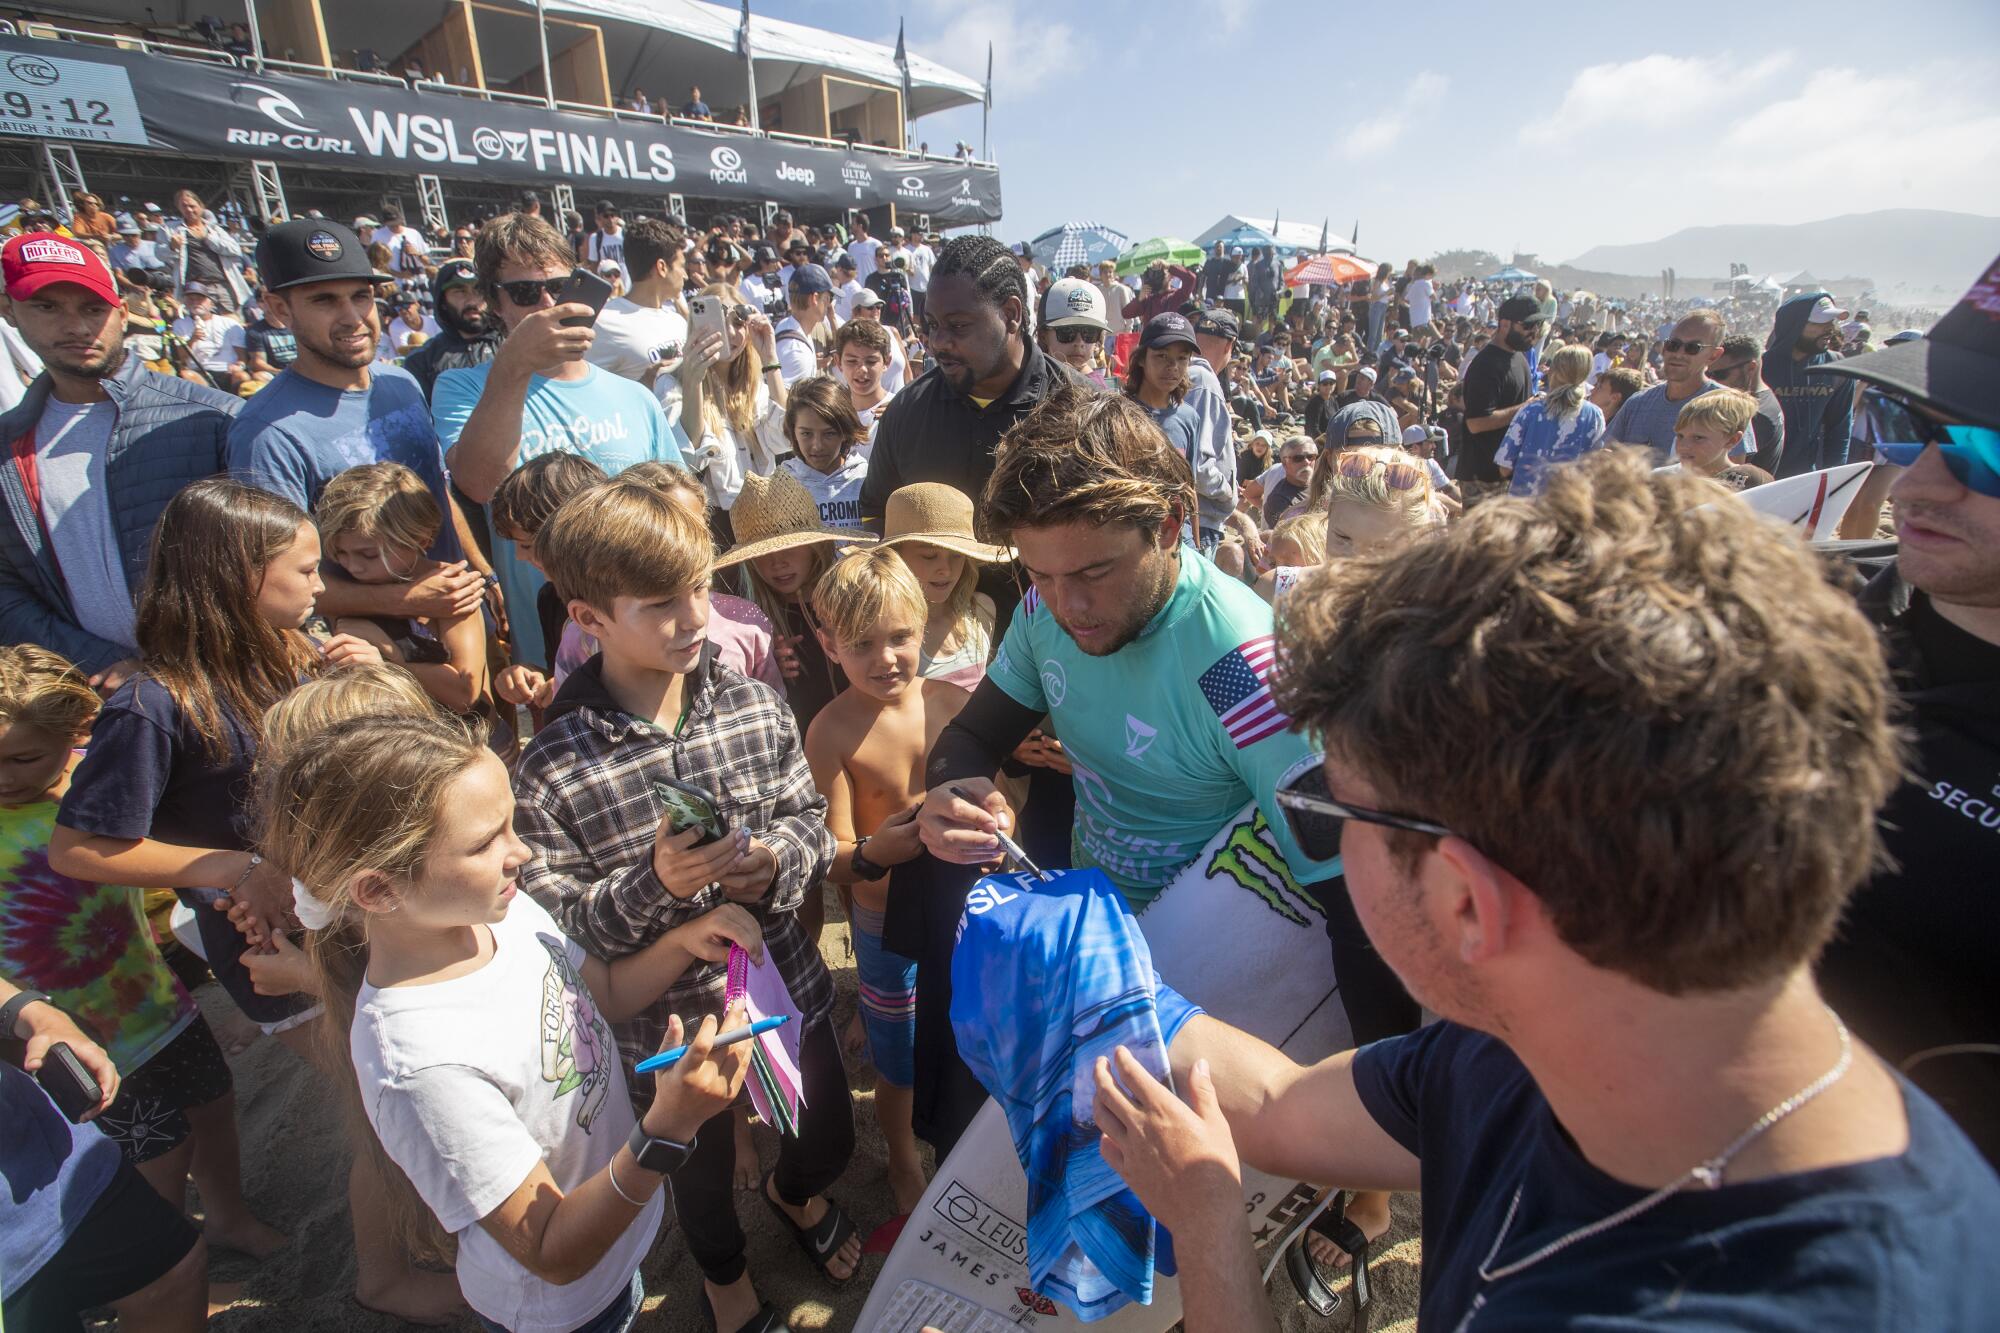 Children and other fans crowd around Conner Coffin to get autographs at the WSL Finals.